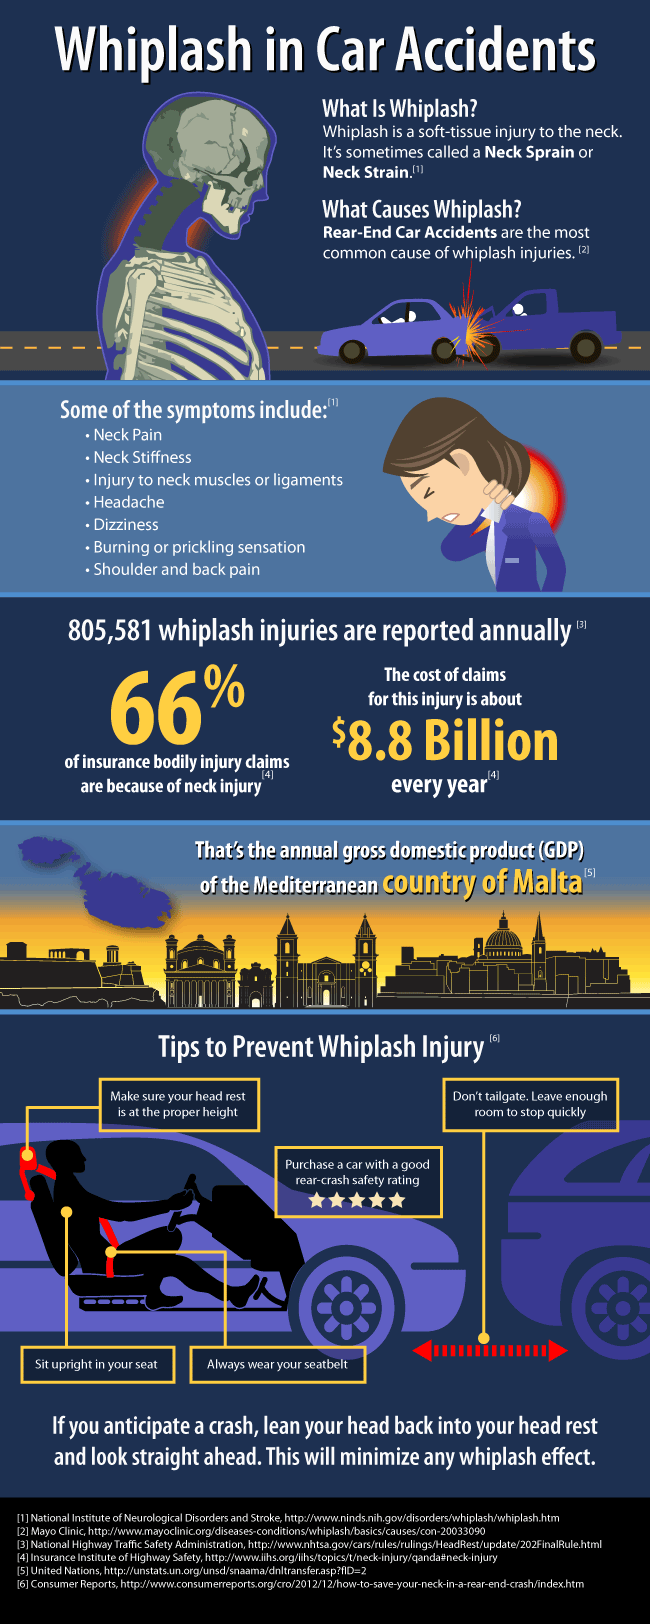 Whiplash in Car Accidents